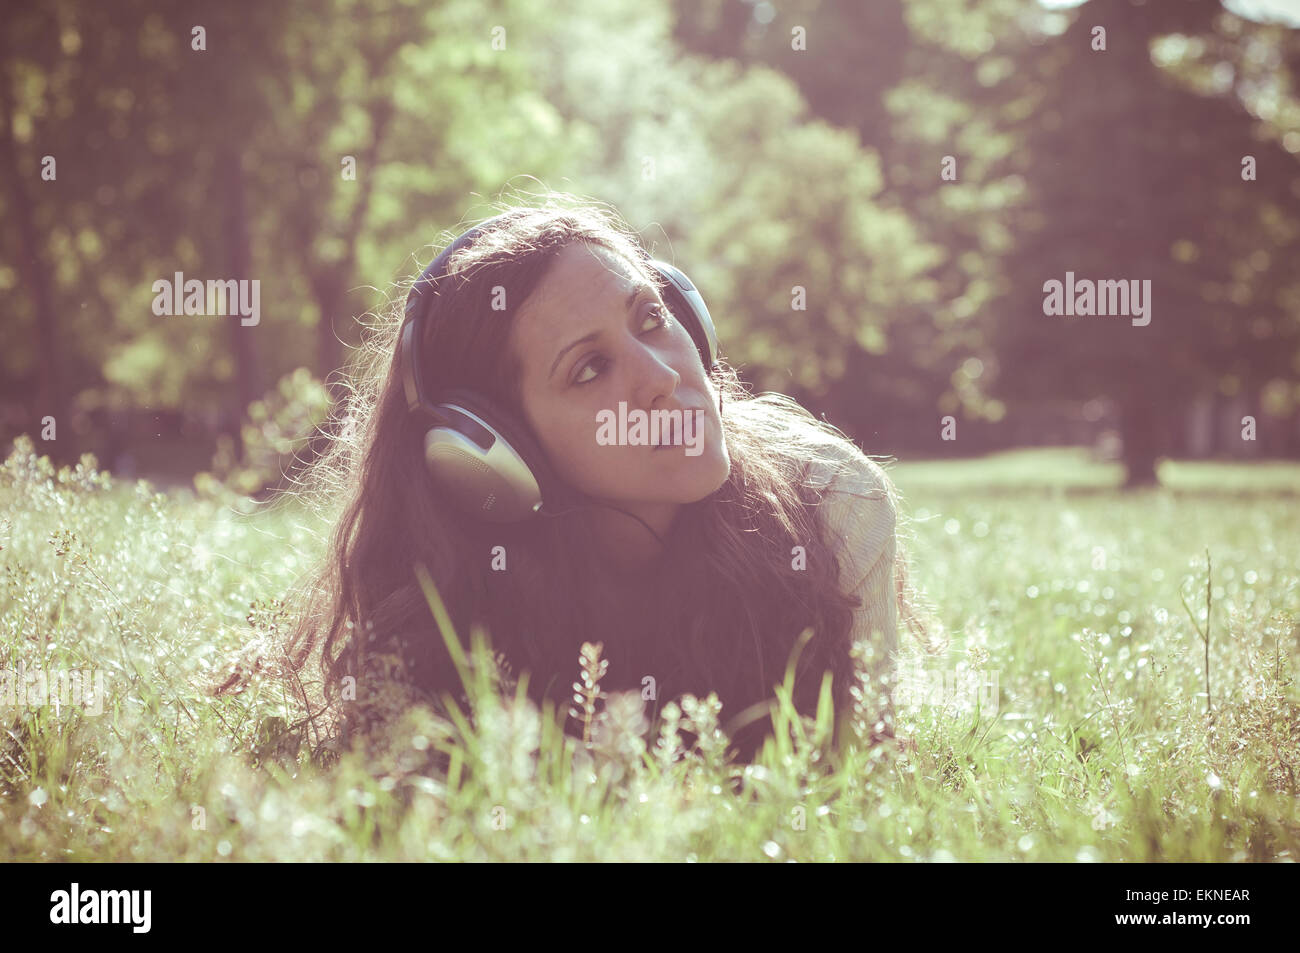 vintage hipster eastern woman with headphones Stock Photo